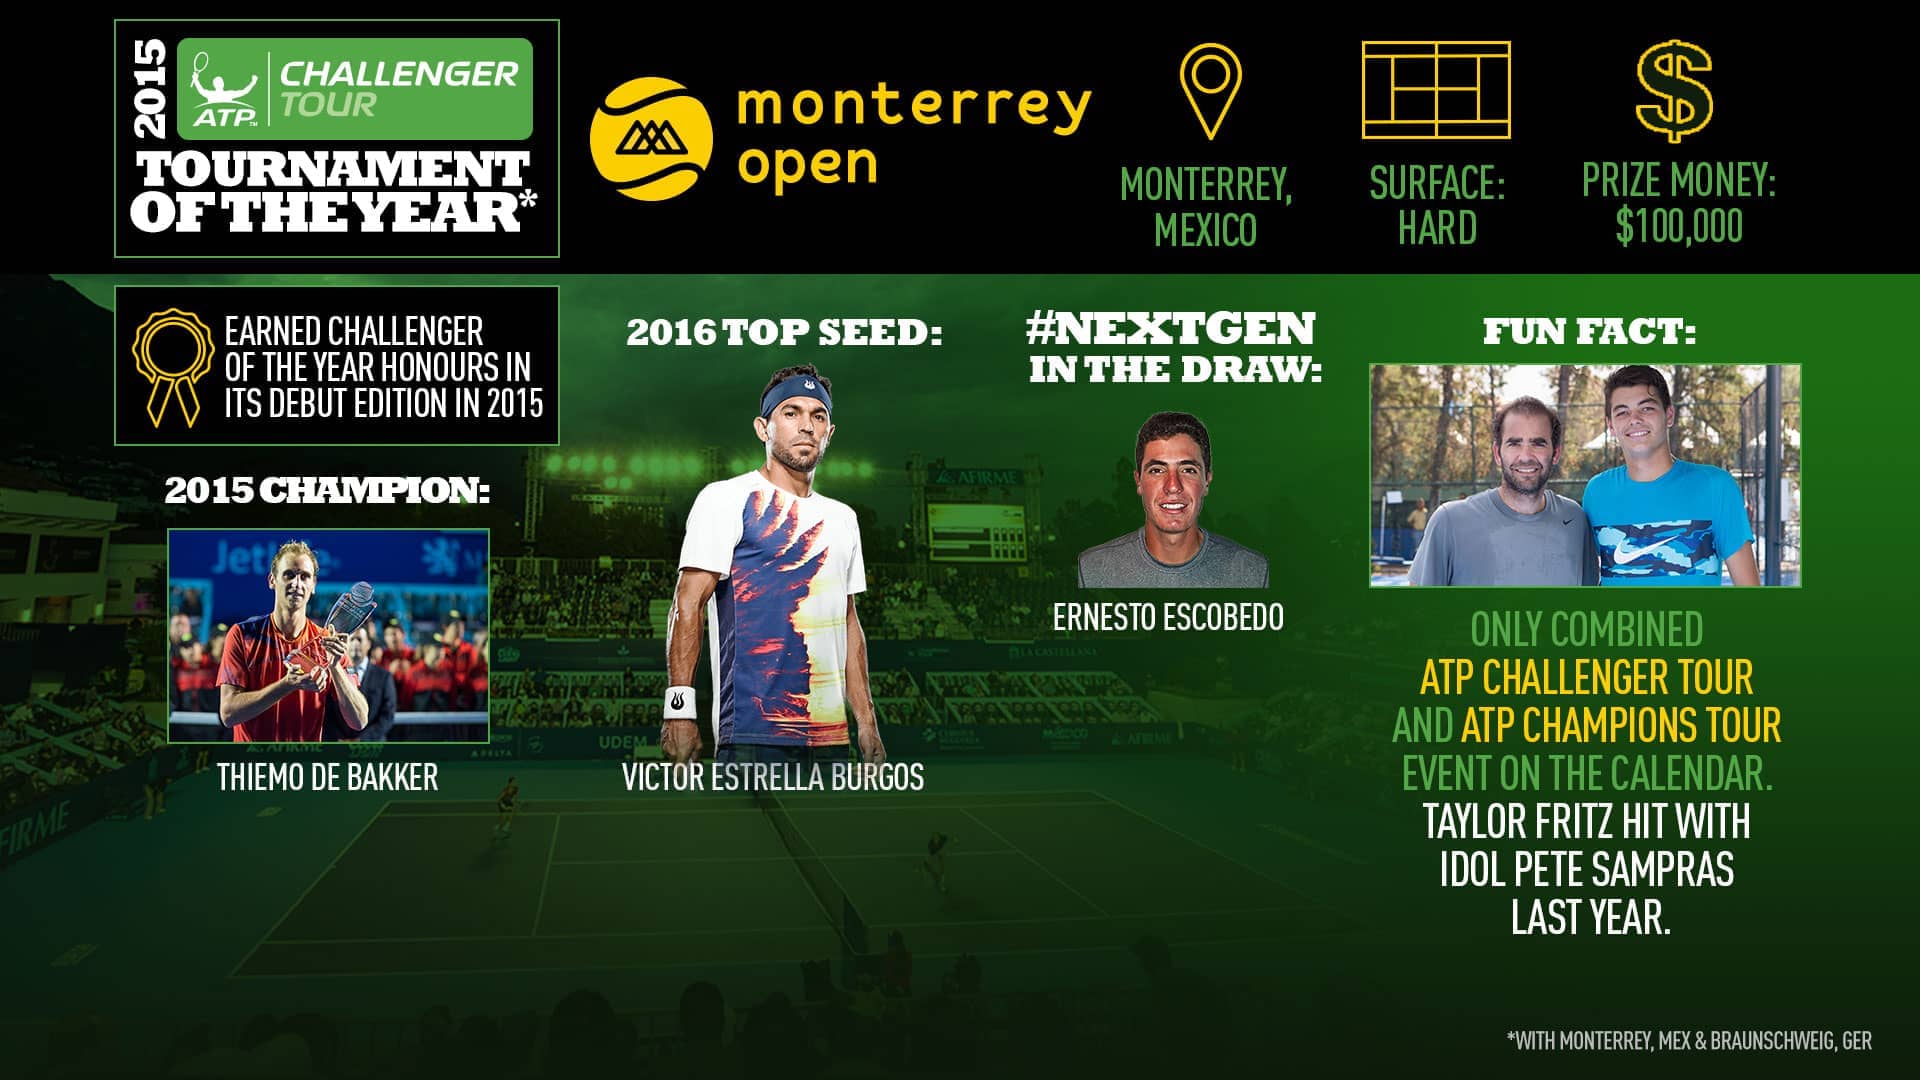 The Monterrey Open is once again proving why it was named a Challenger Tournament of the Year.